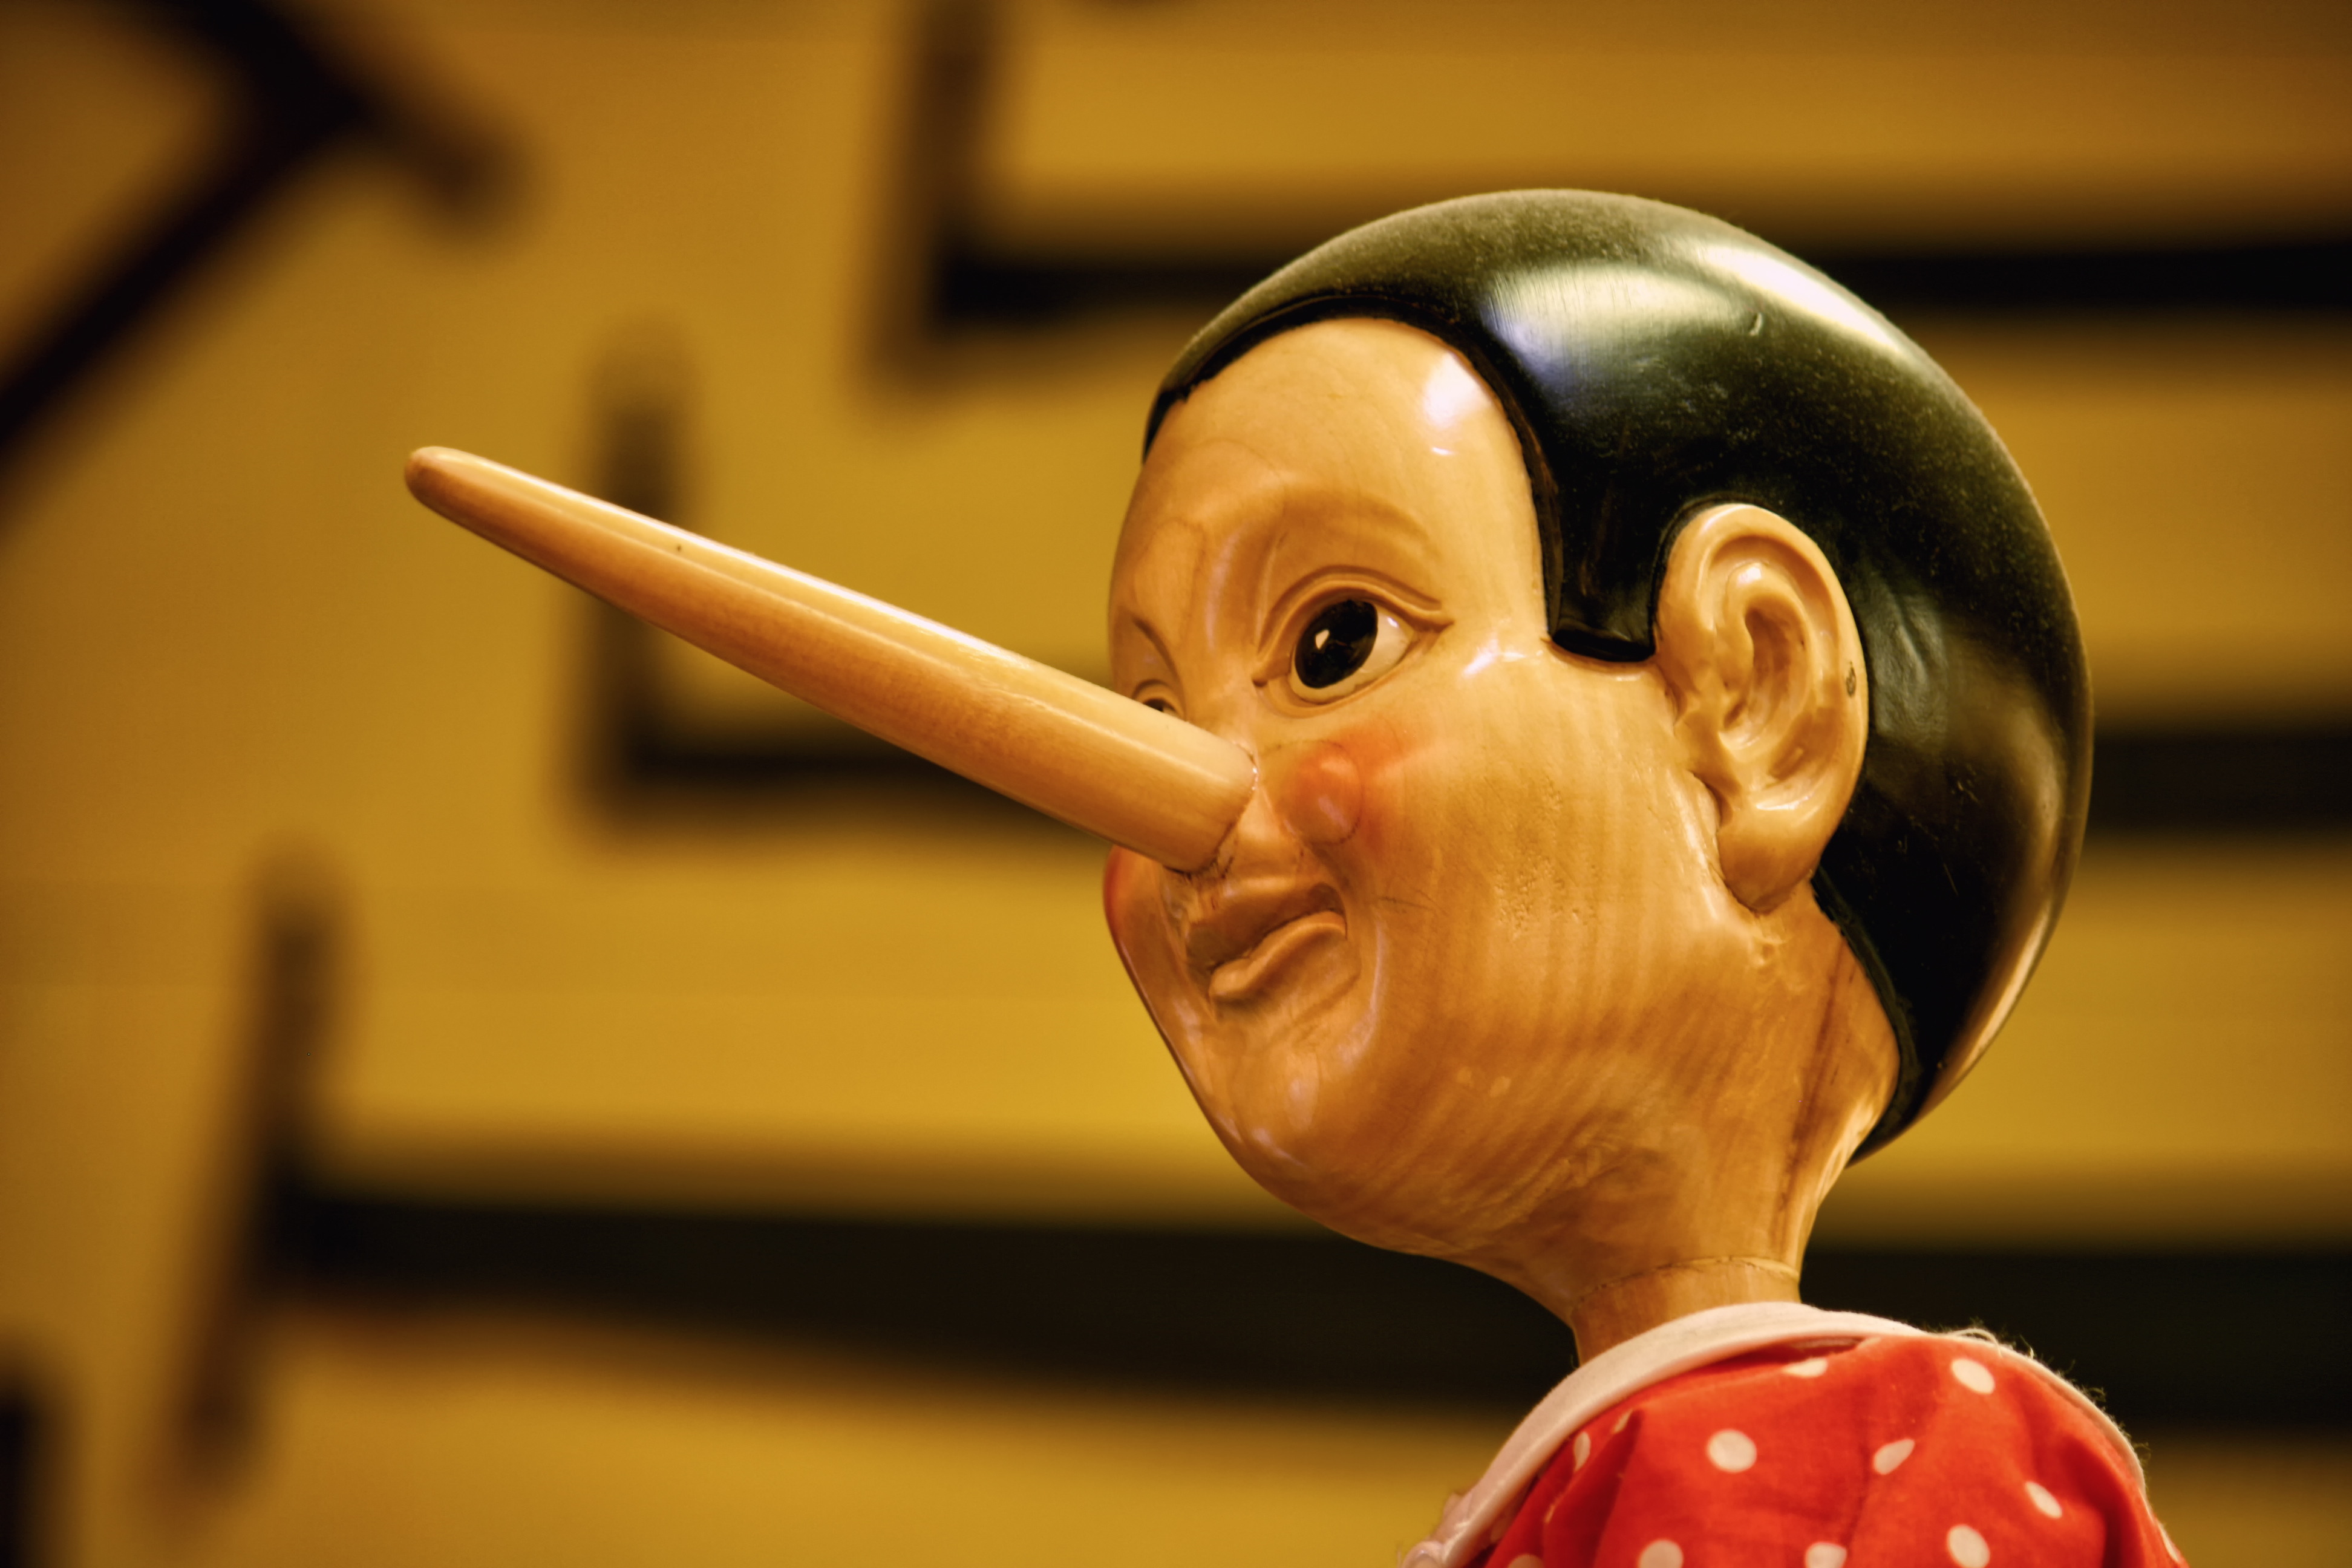 "Pinnochio" as seen in Florence, Italy, on July 1, 2011 | Source: Getty Images